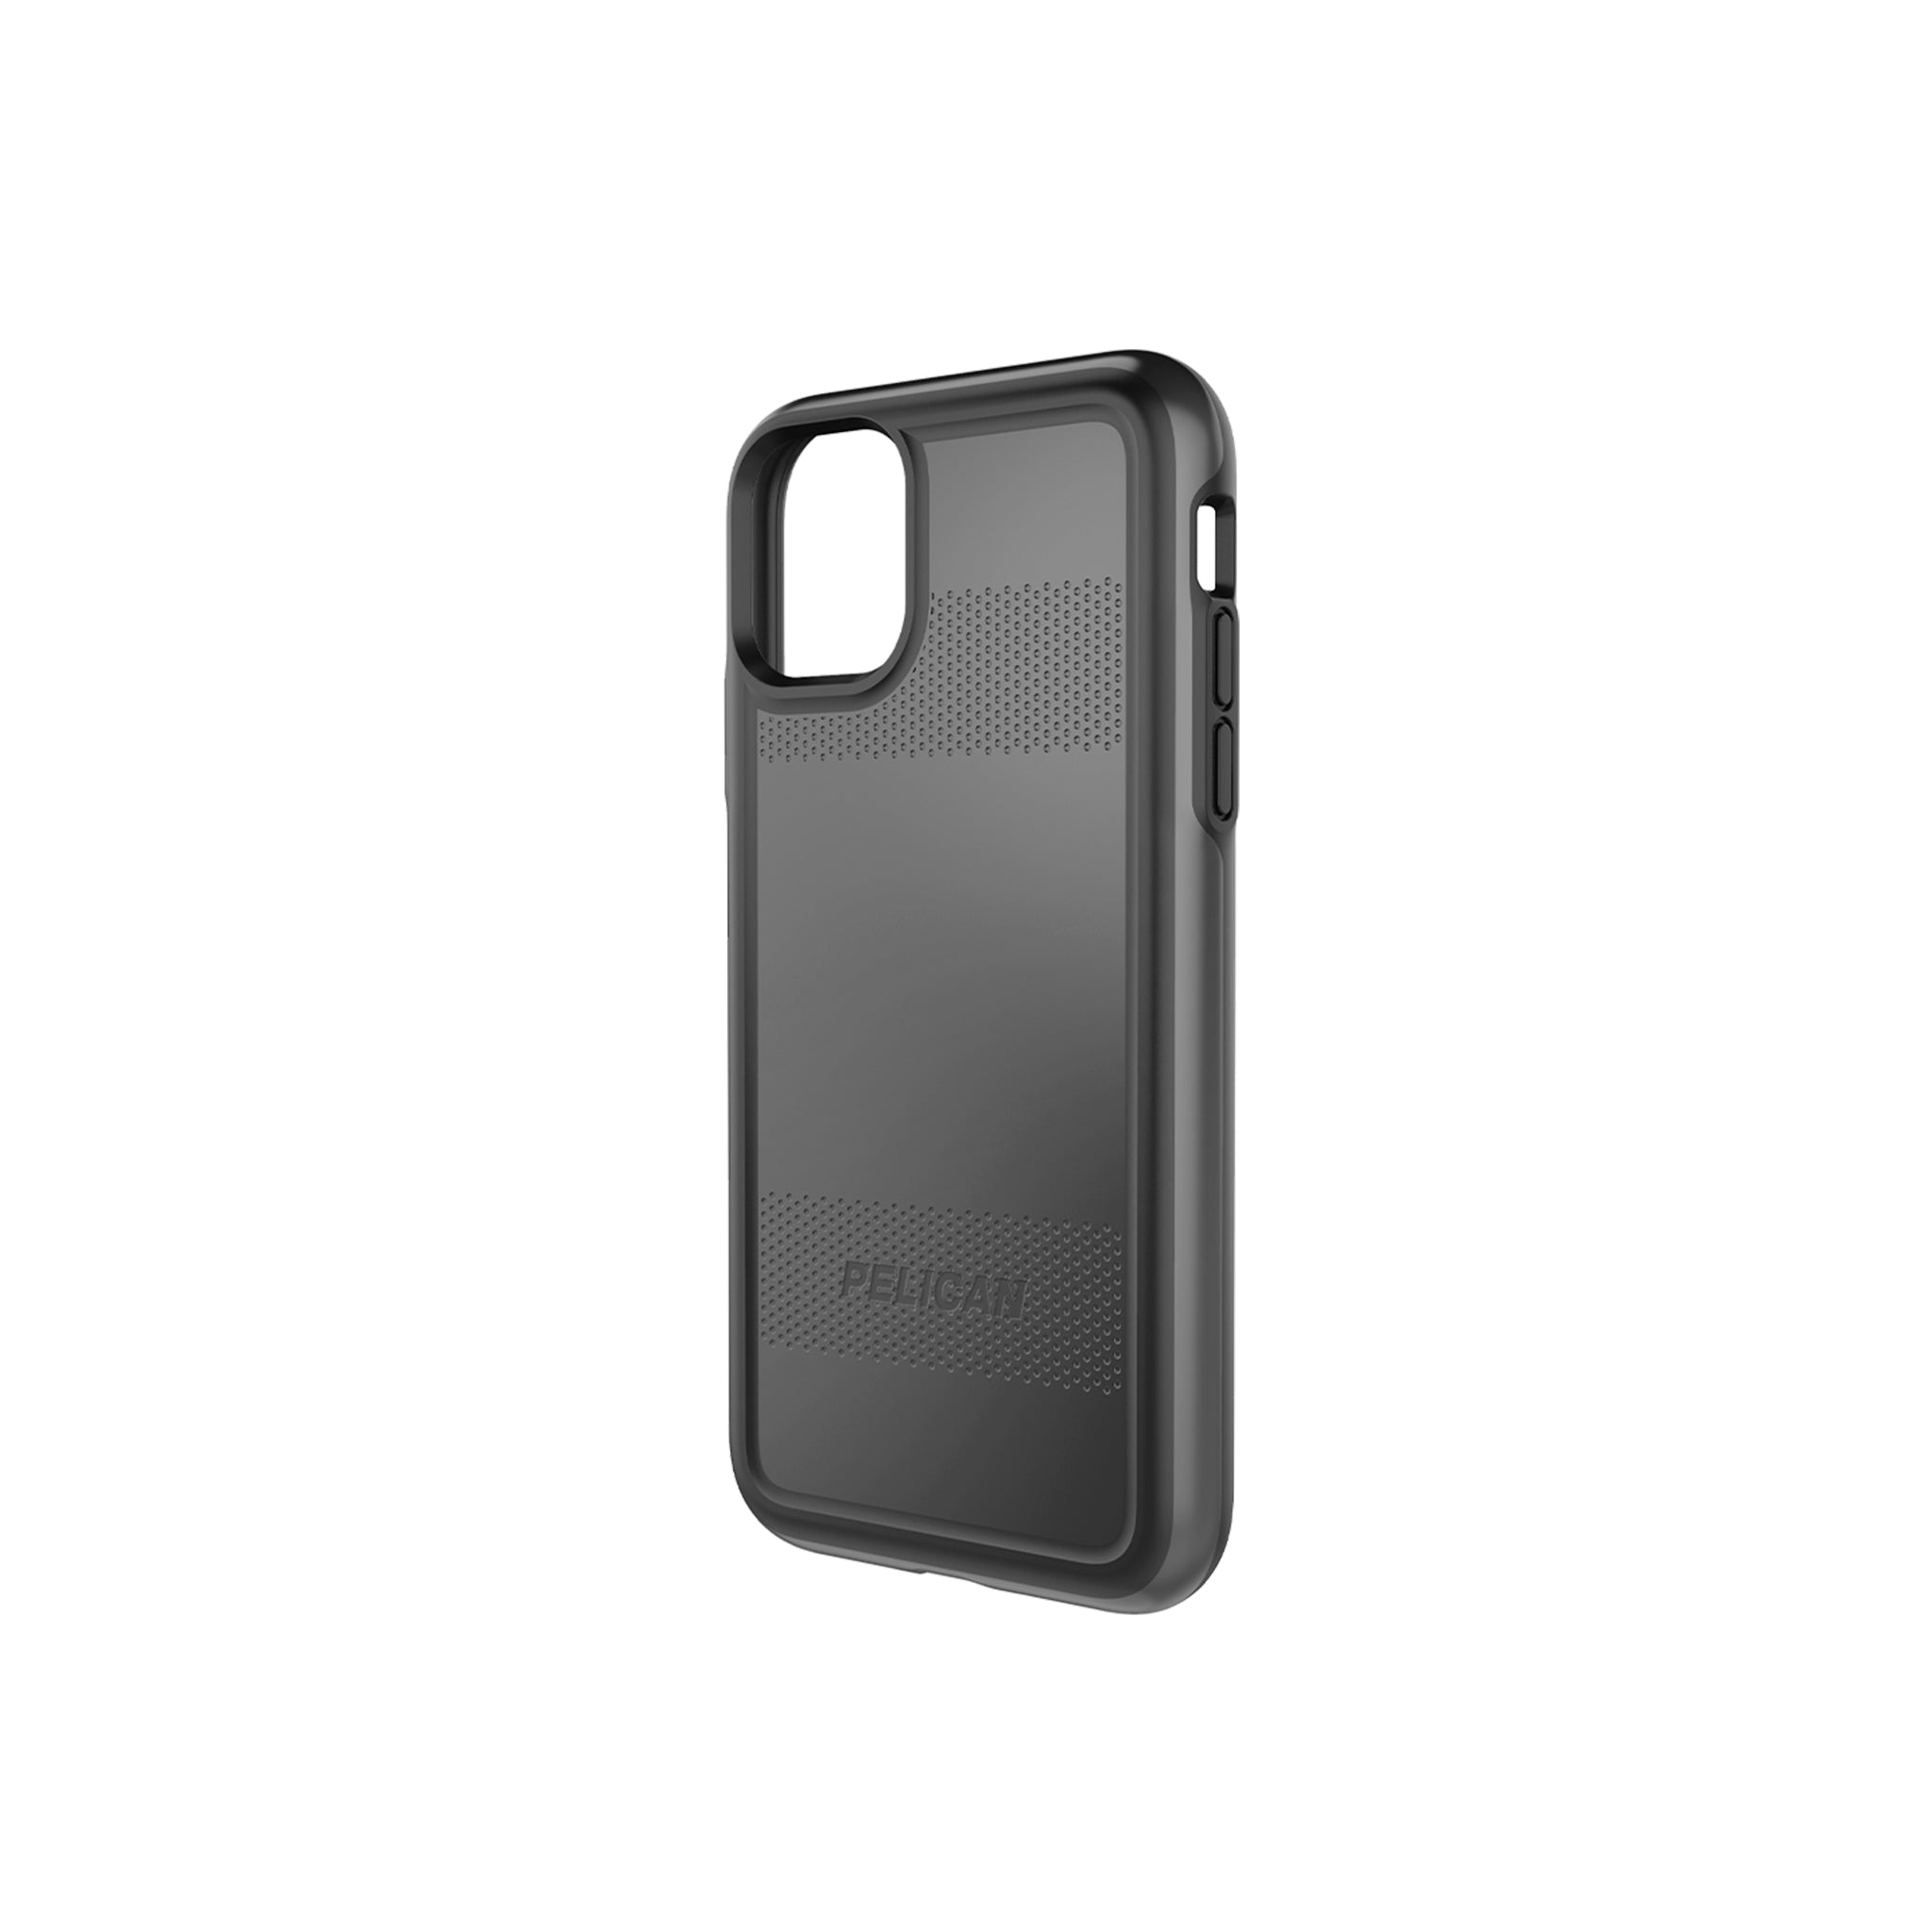 Pelican - Protector Case For Apple iPhone 11 Pro Max / Xs Max - Black